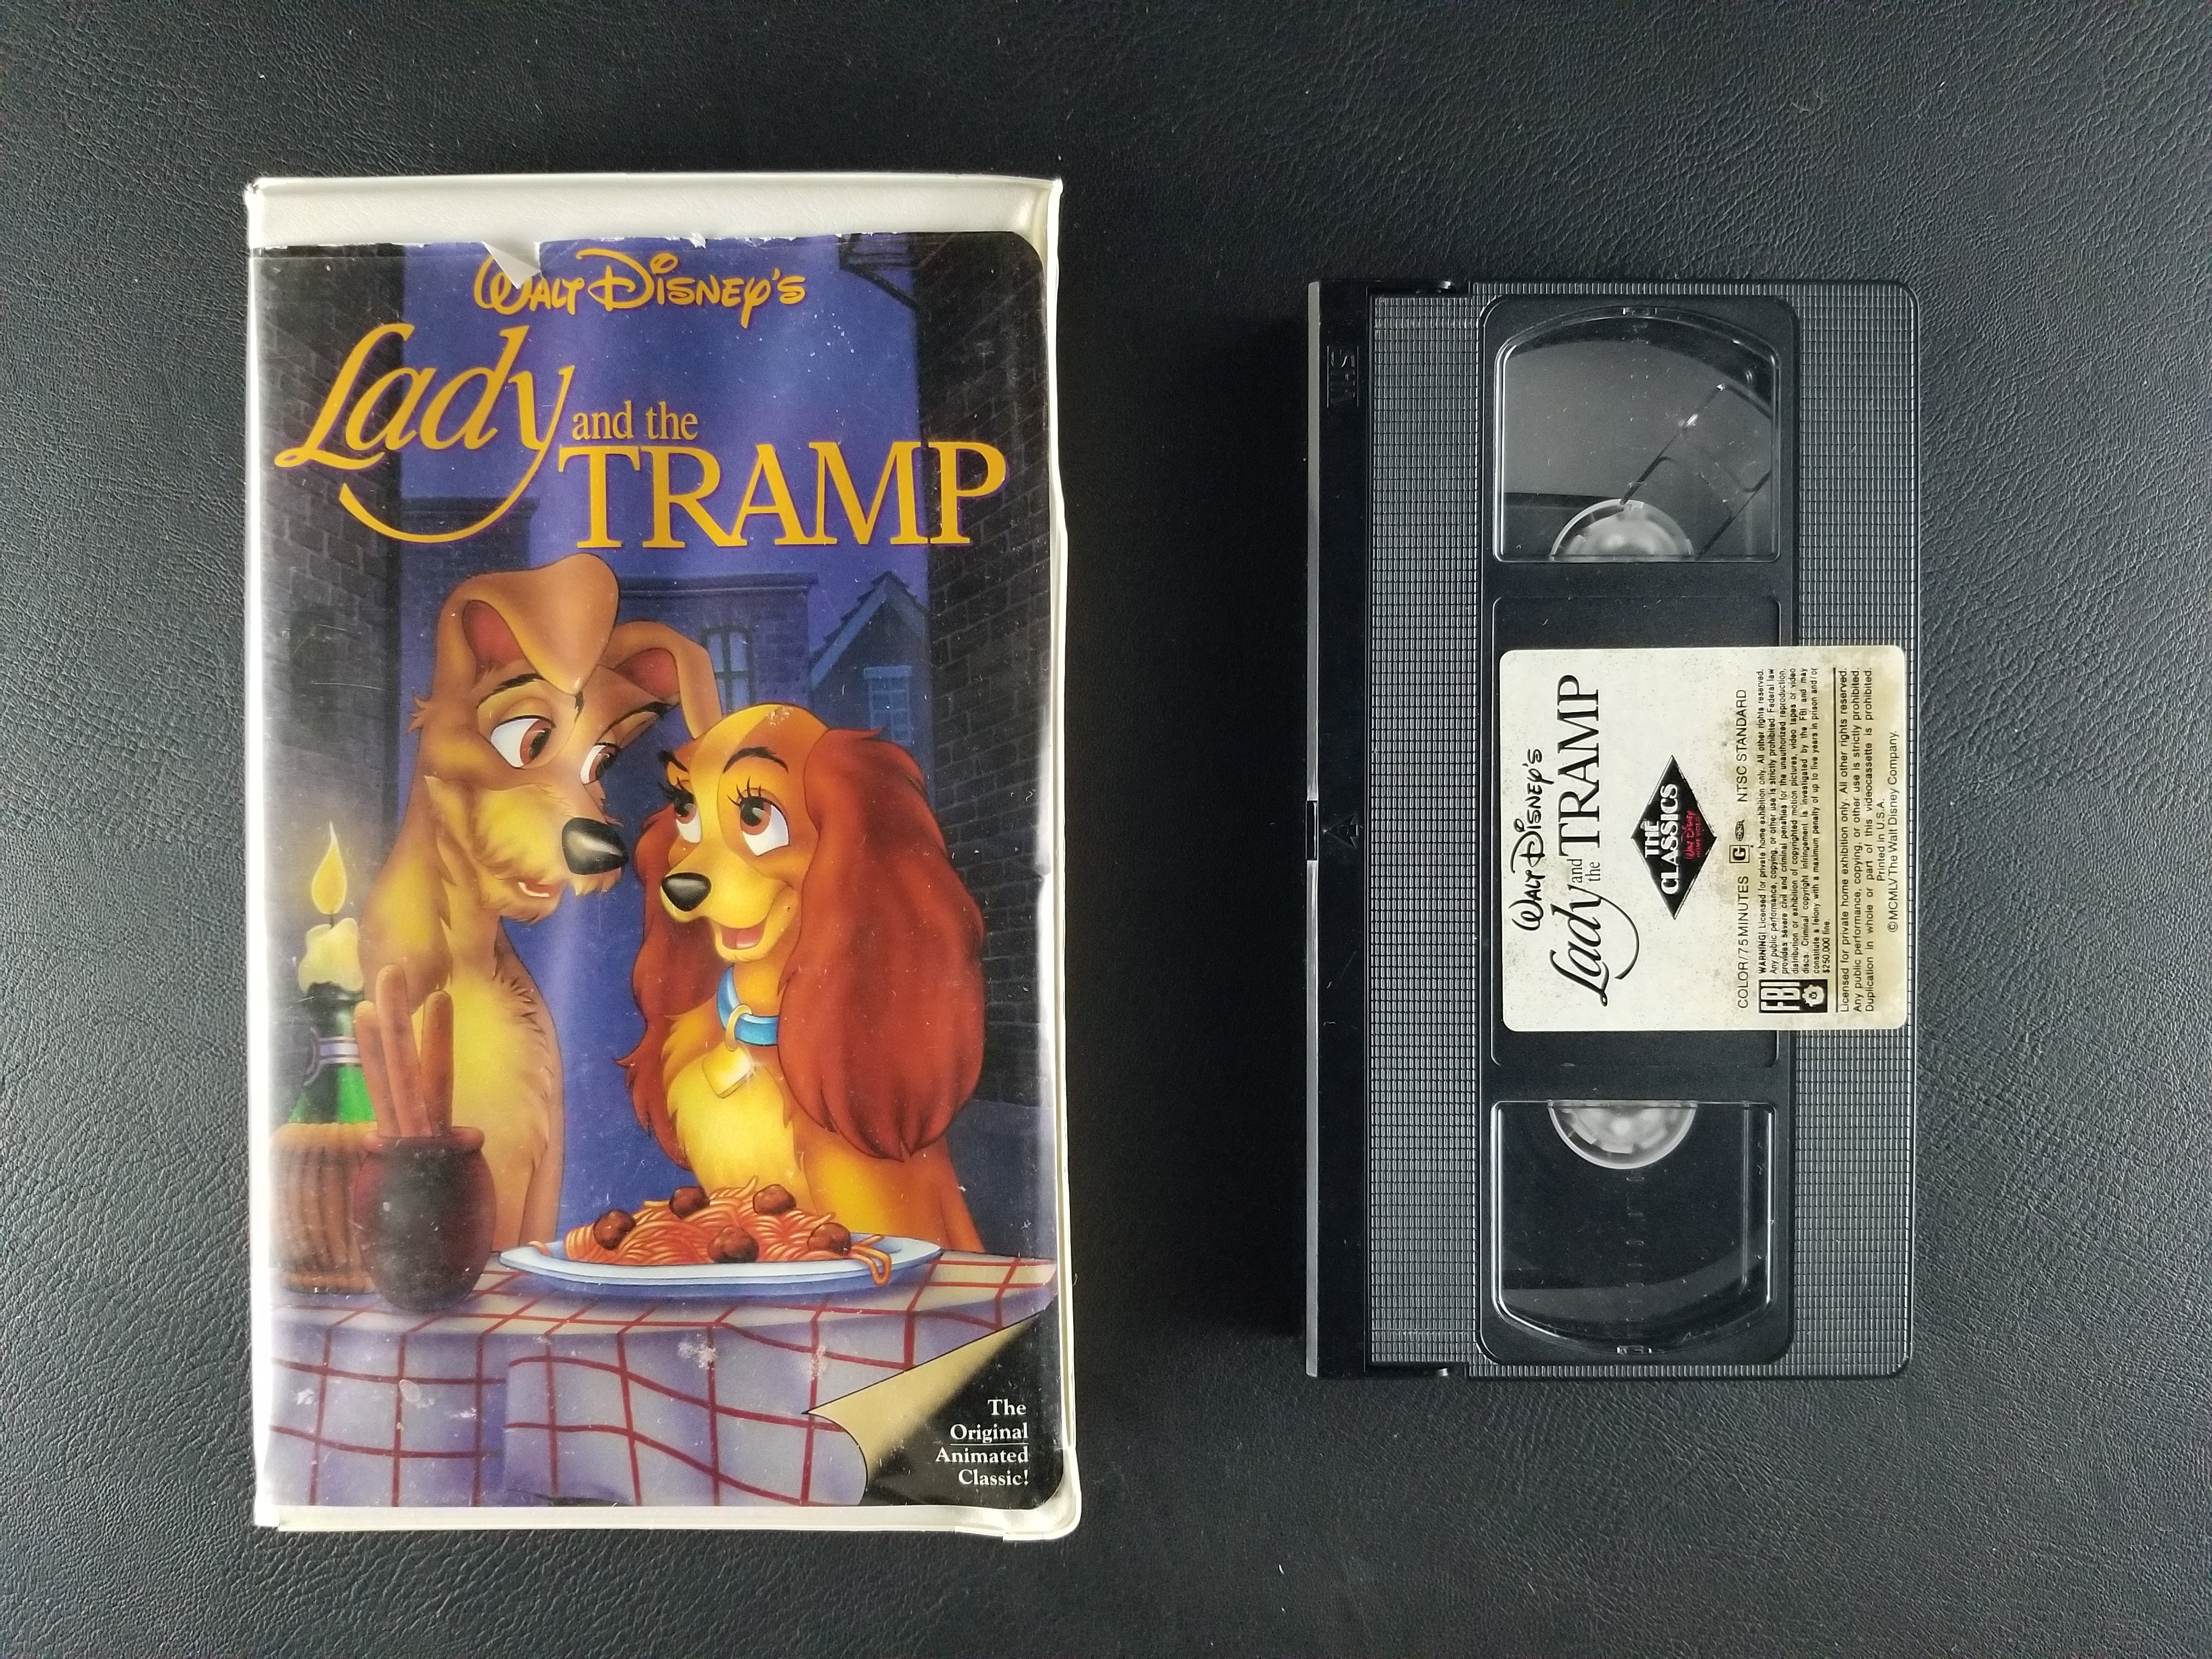 lady and the tramp vhs 1987